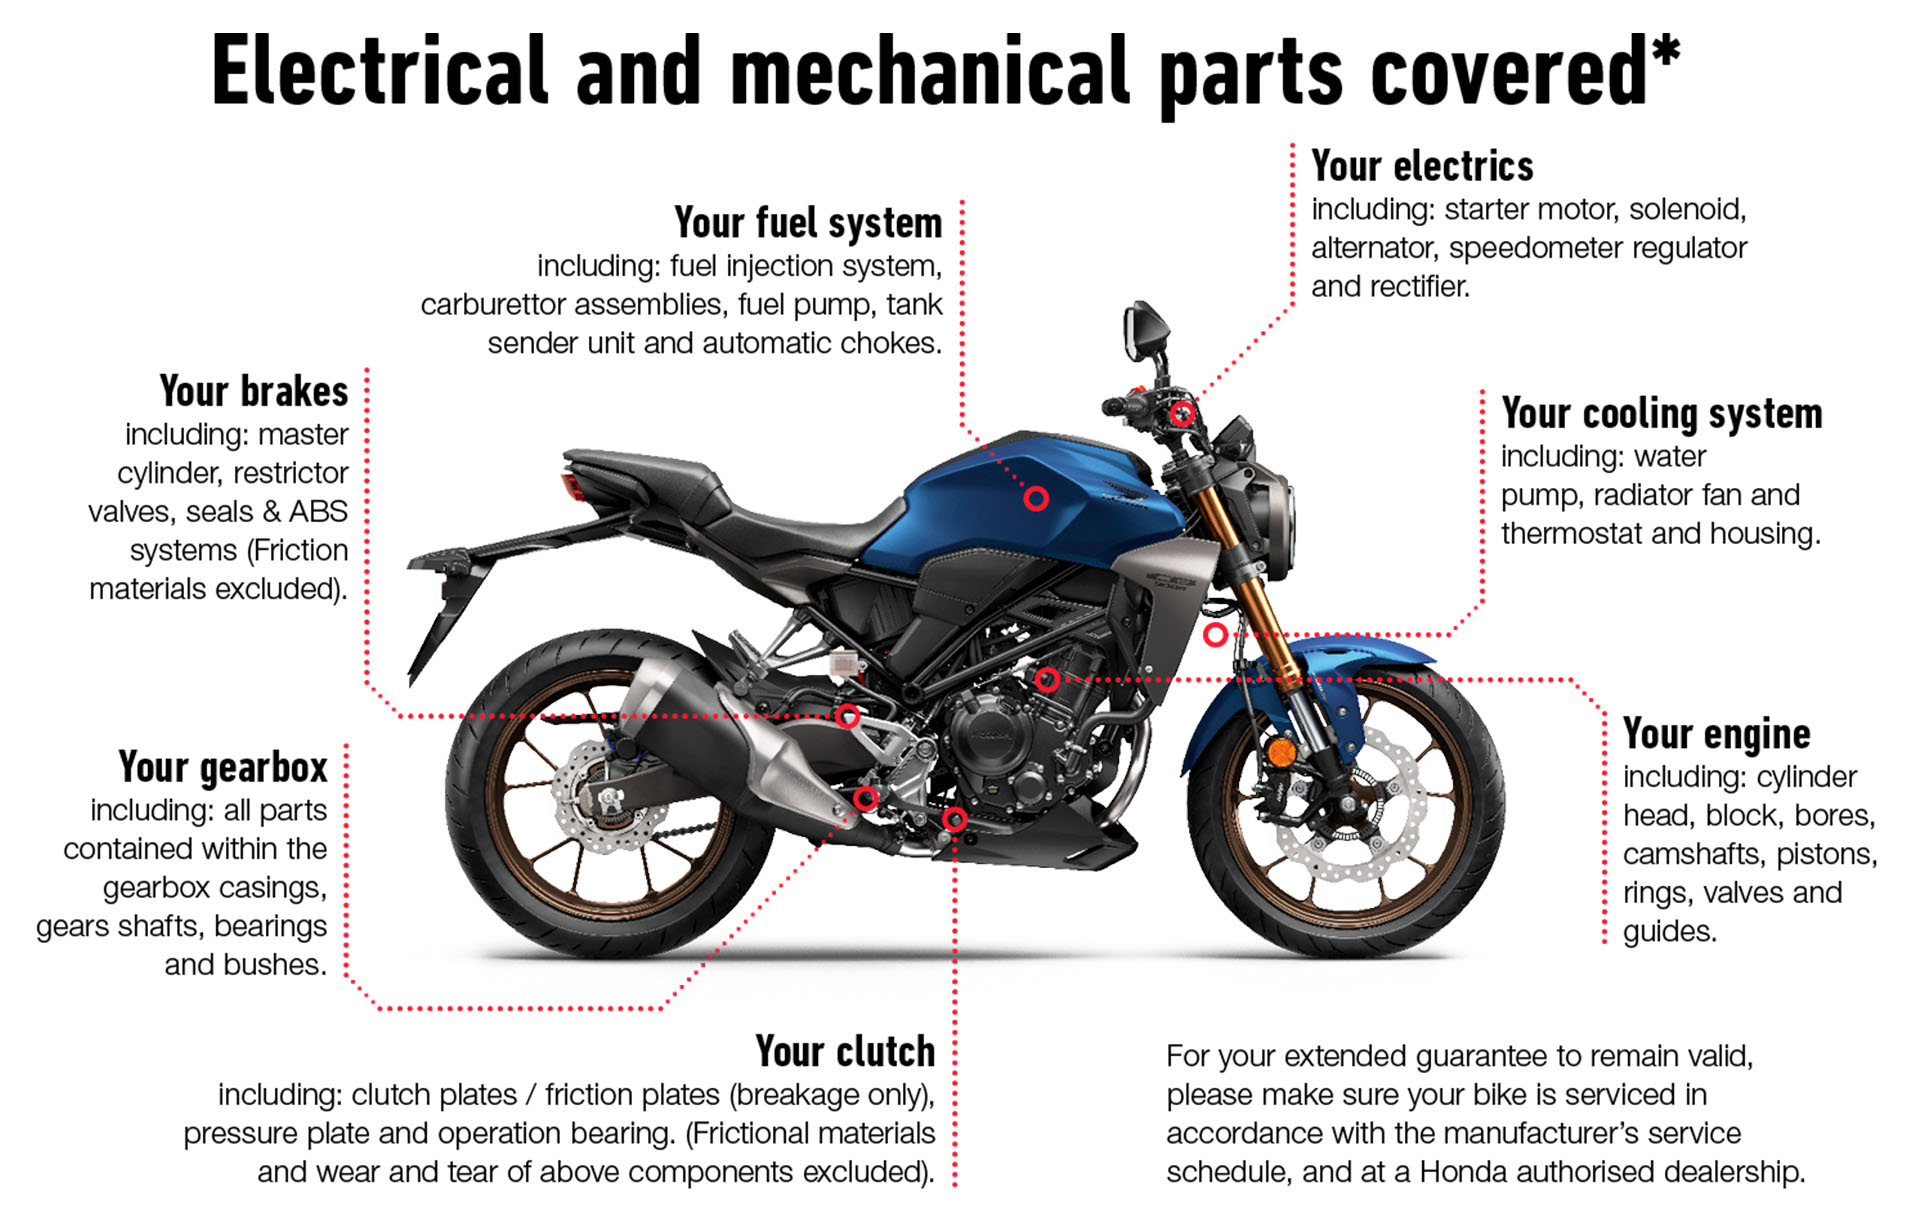 Electrical and mechanical parts covered in Honda extended guarantee